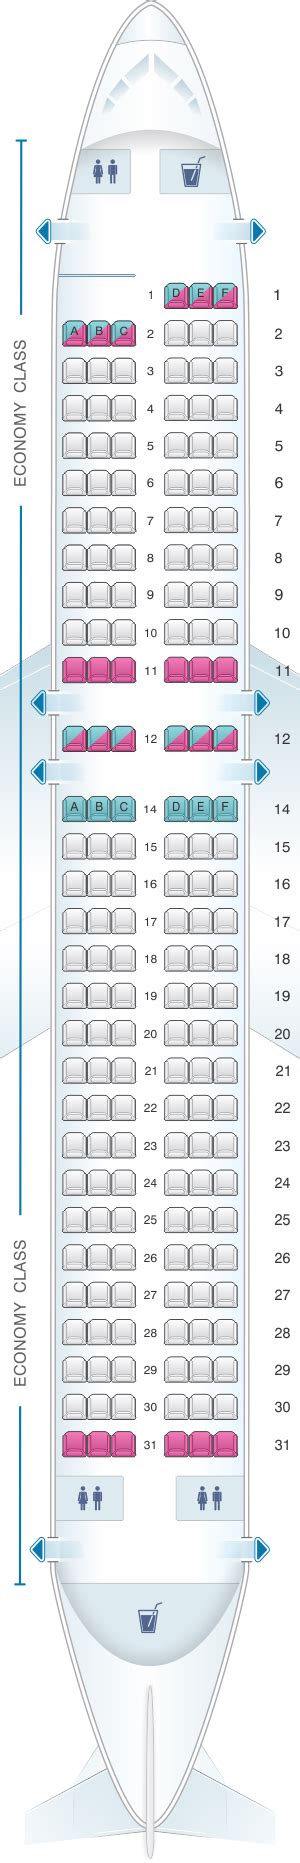 Allegiant airbus a320 seating chart. 30-34". Pitch. local_pizza. Food & Snacks. Seat 10B is a standard economy middle seat with 30-34" of seat pitch, which is average across Airbus A320's worldwide. 